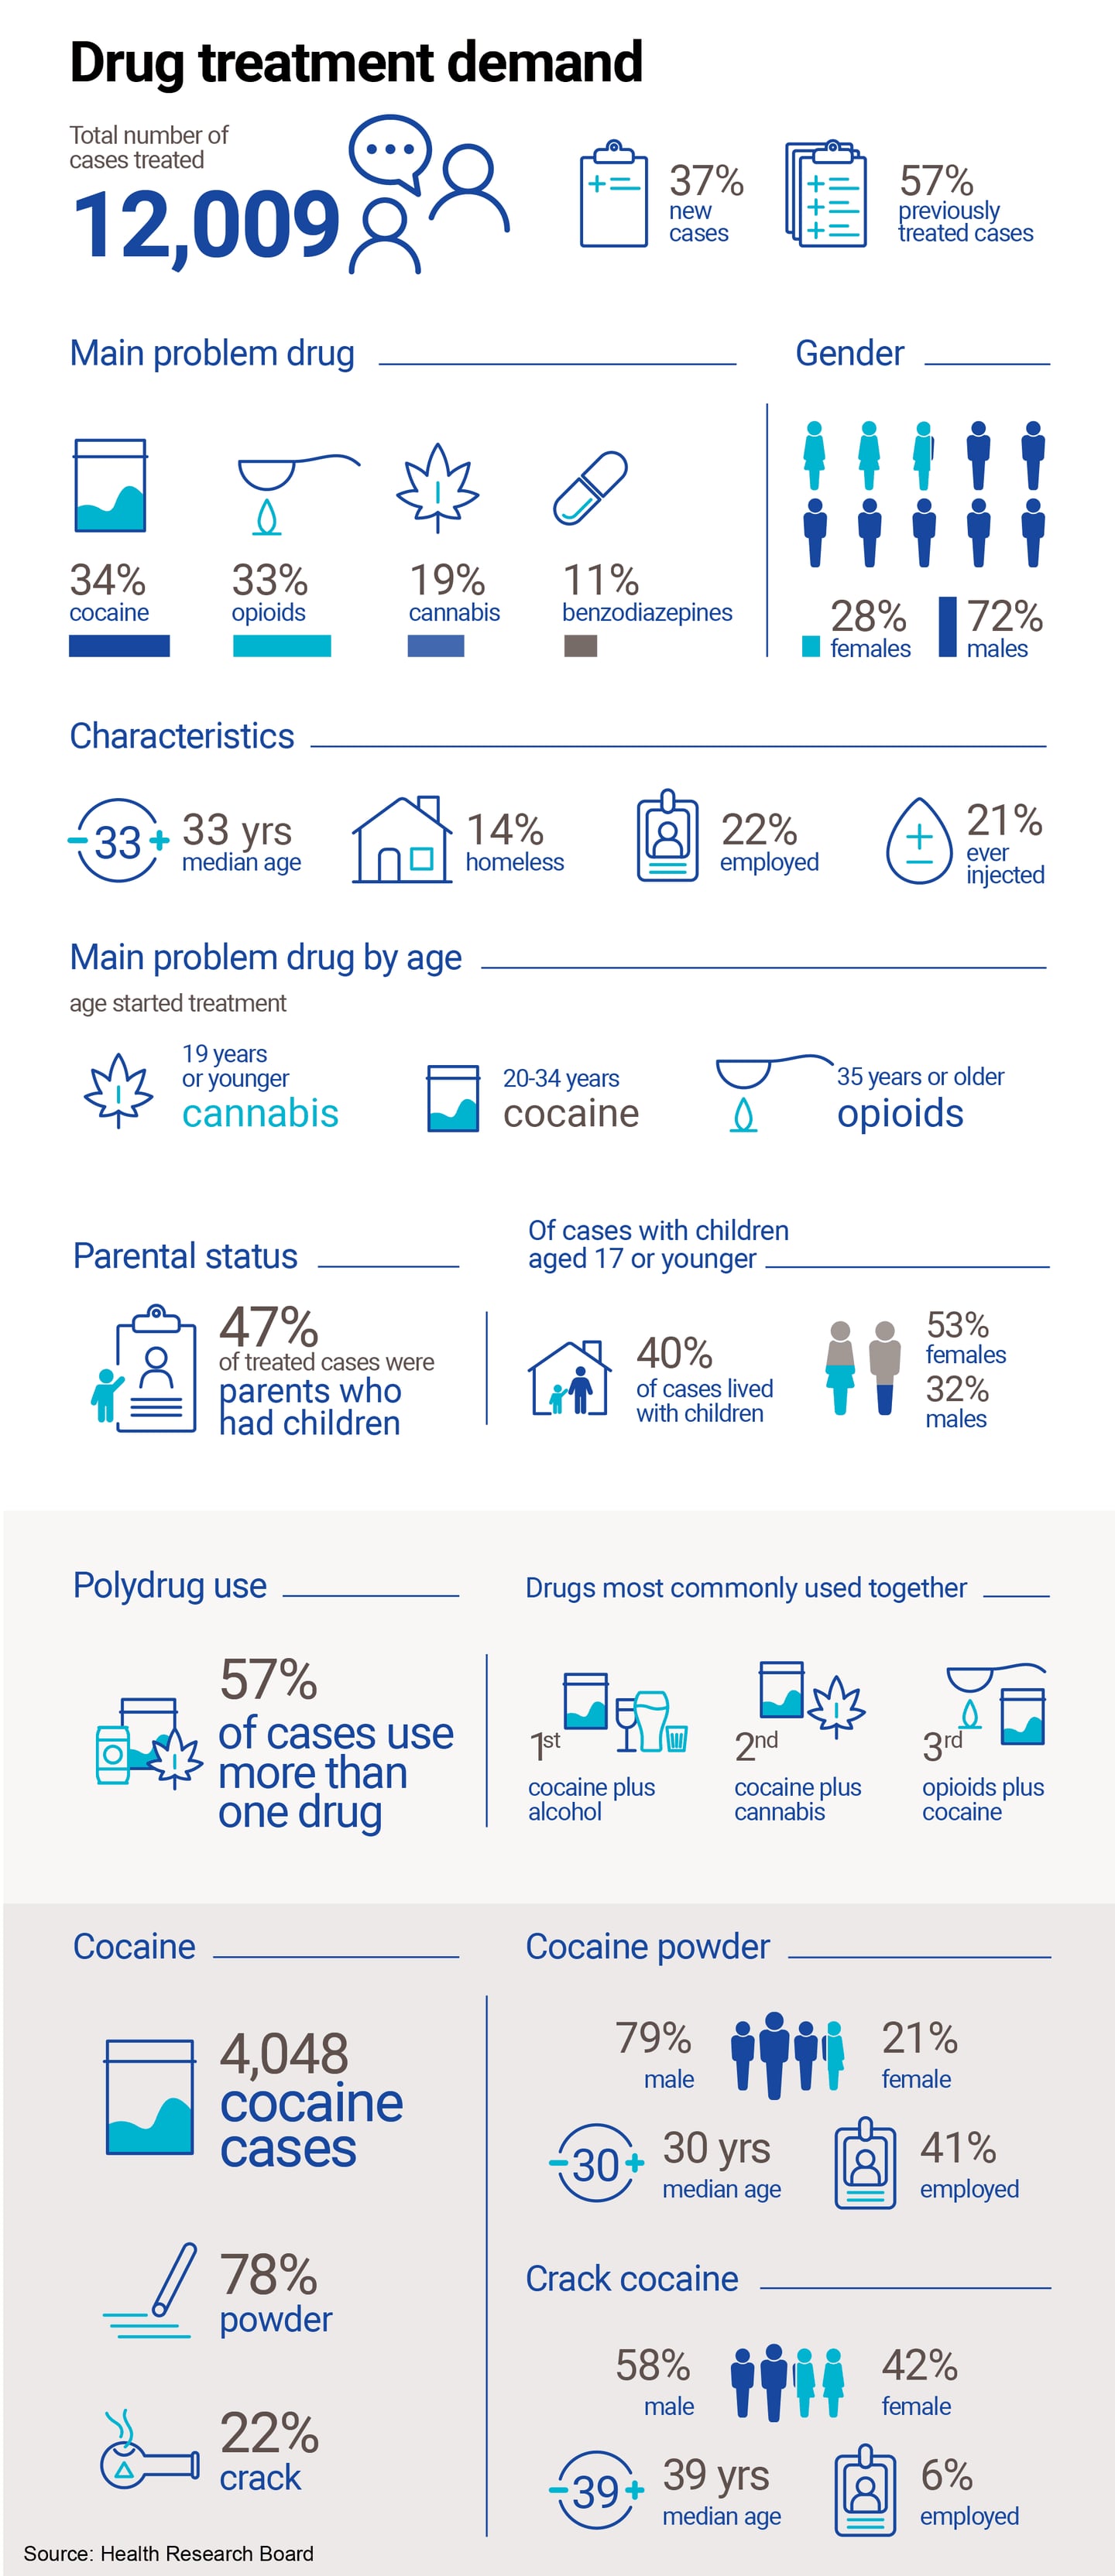 Cocaine is the most common drug for which individuals are seeking treatment